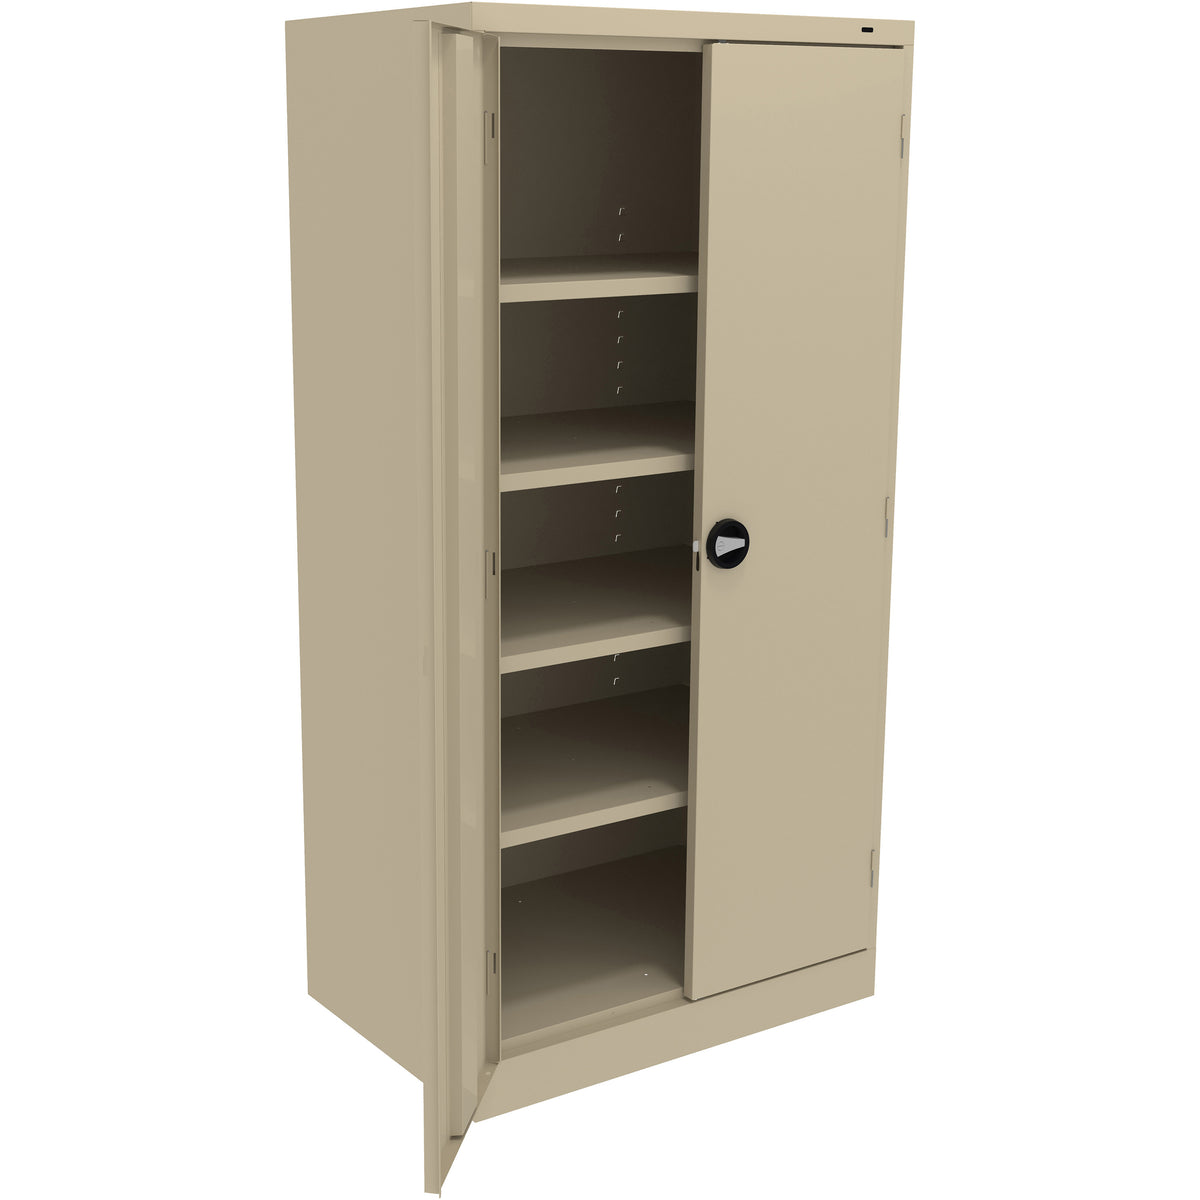 Tennsco 72" High Standard Traditional Recessed Handle Cabinet - Assembled, 7224RH